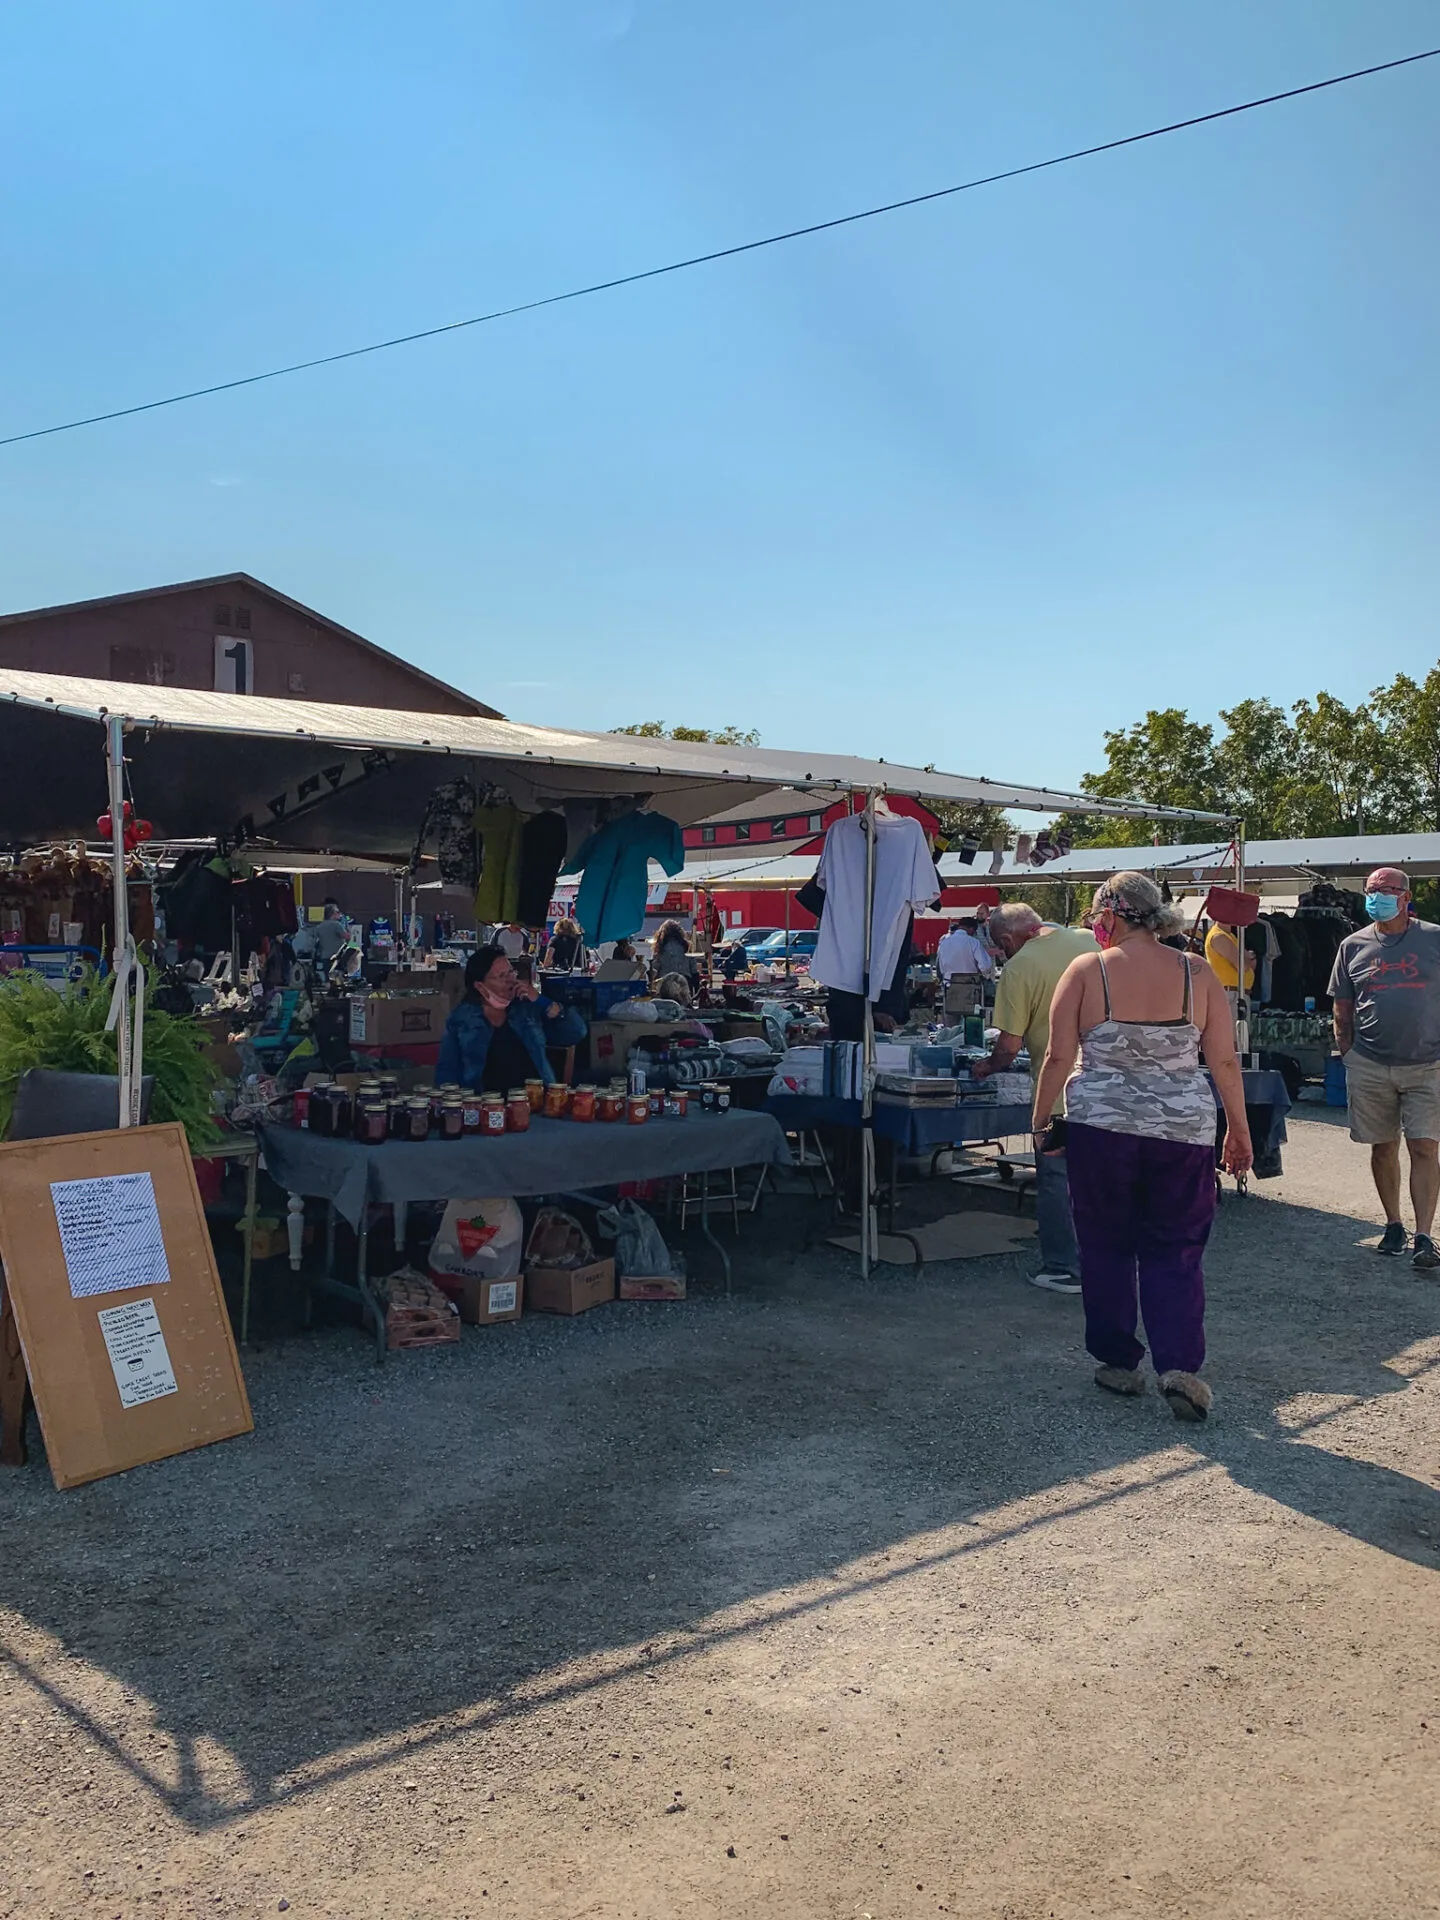 Vendors at Courtice Flea Market in Courtice, Ontario